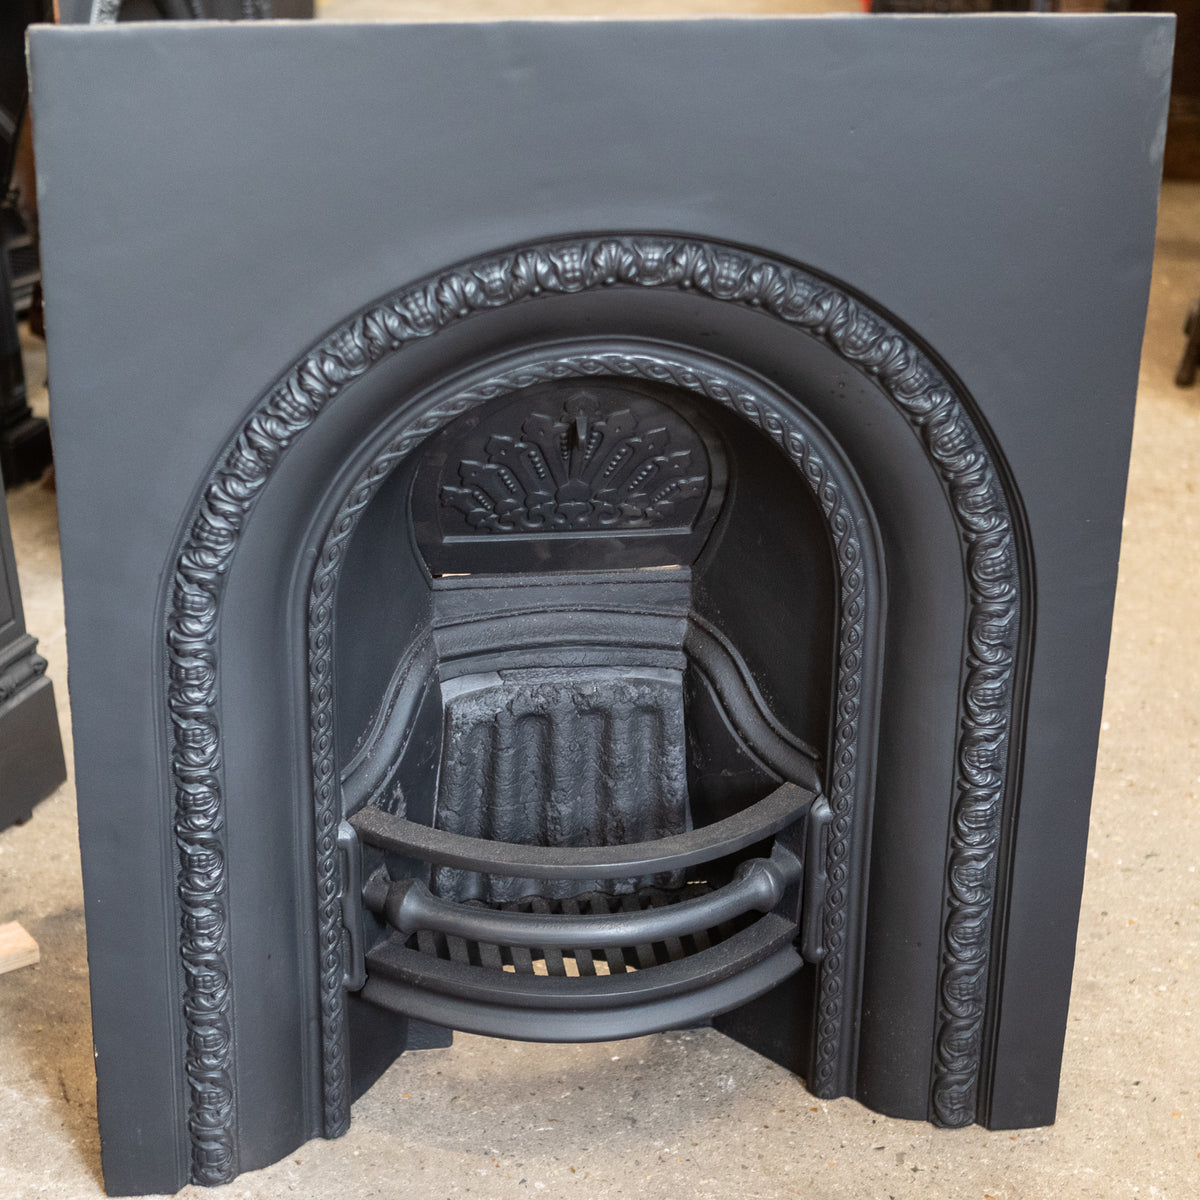 Antique Victorian Cast Iron Fireplace Insert | The Architectural Forum